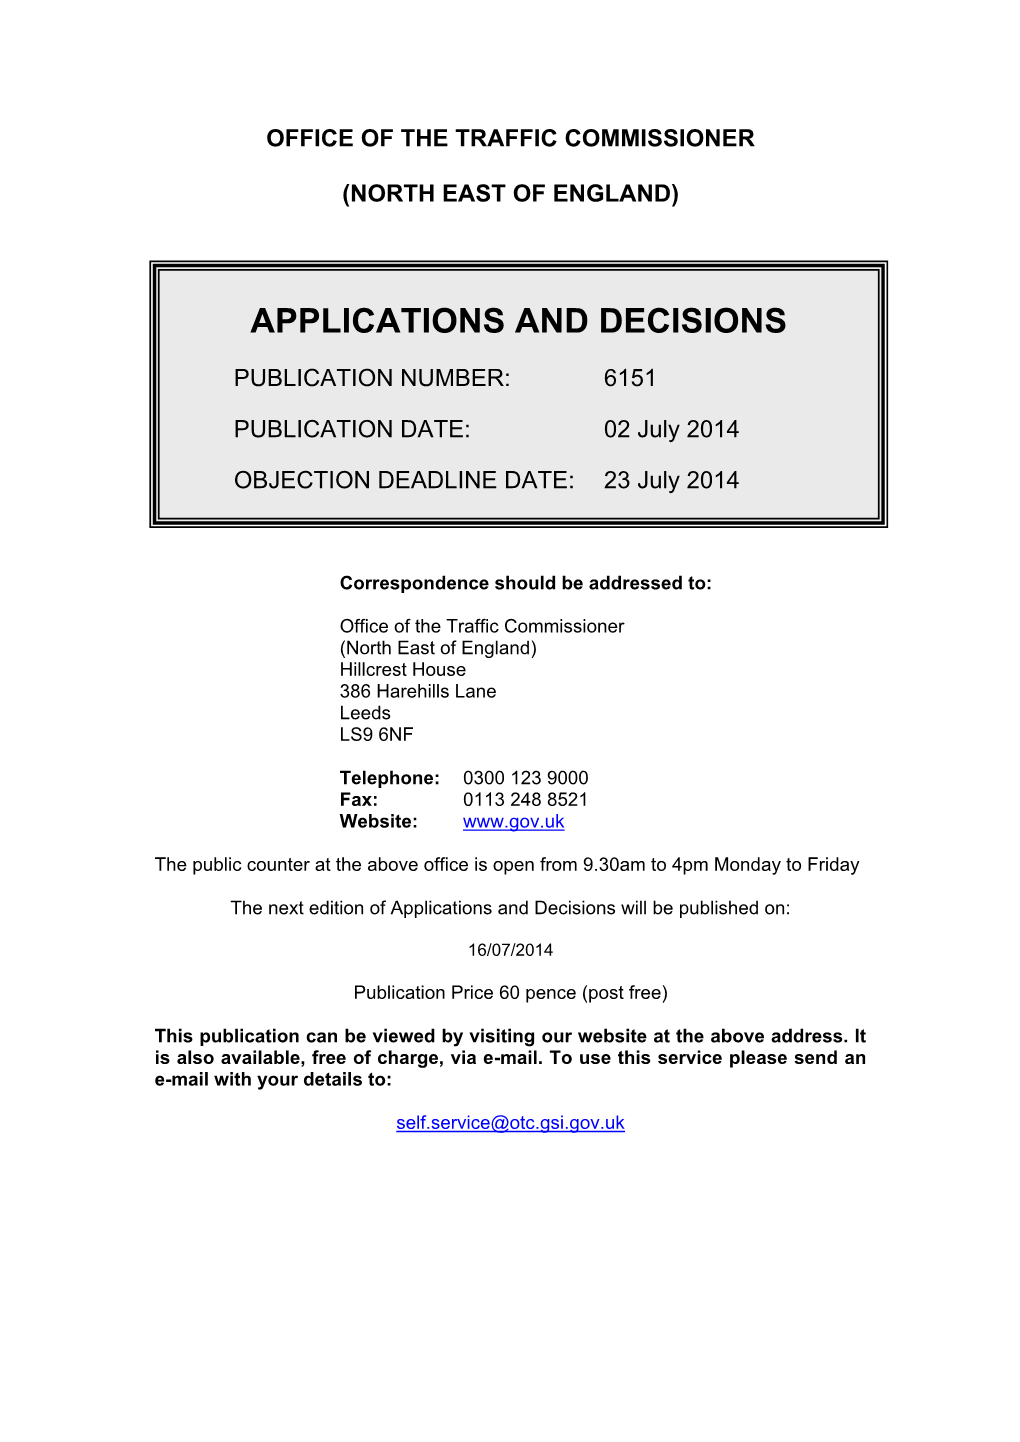 Applications and Decisions 2 July 2014